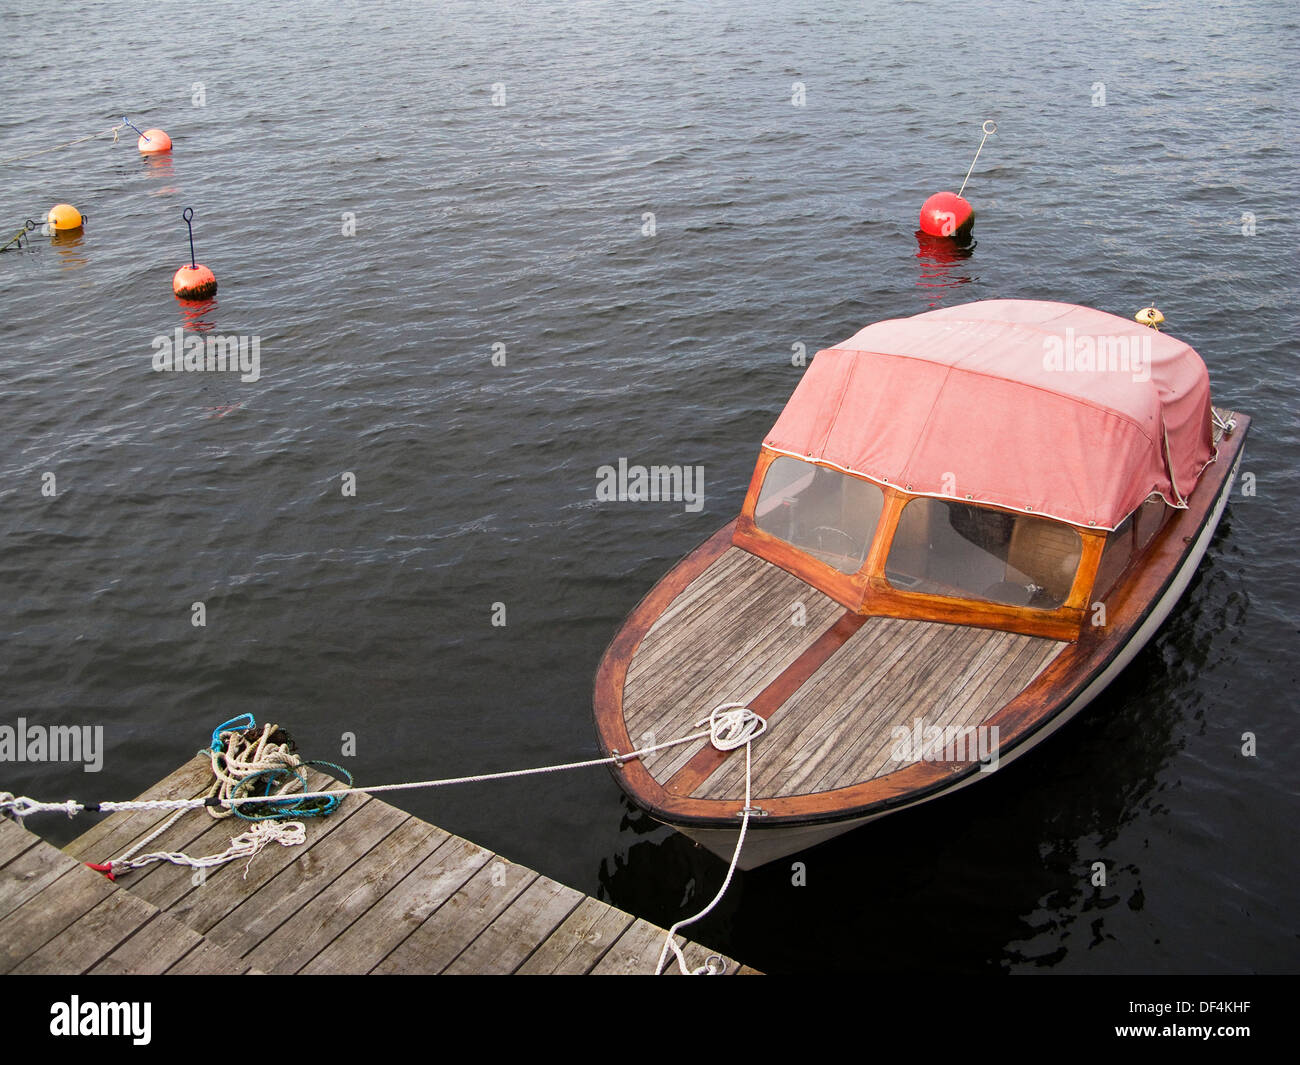 Small Motorboat Moored at Dock, High Angle View Stock Photo